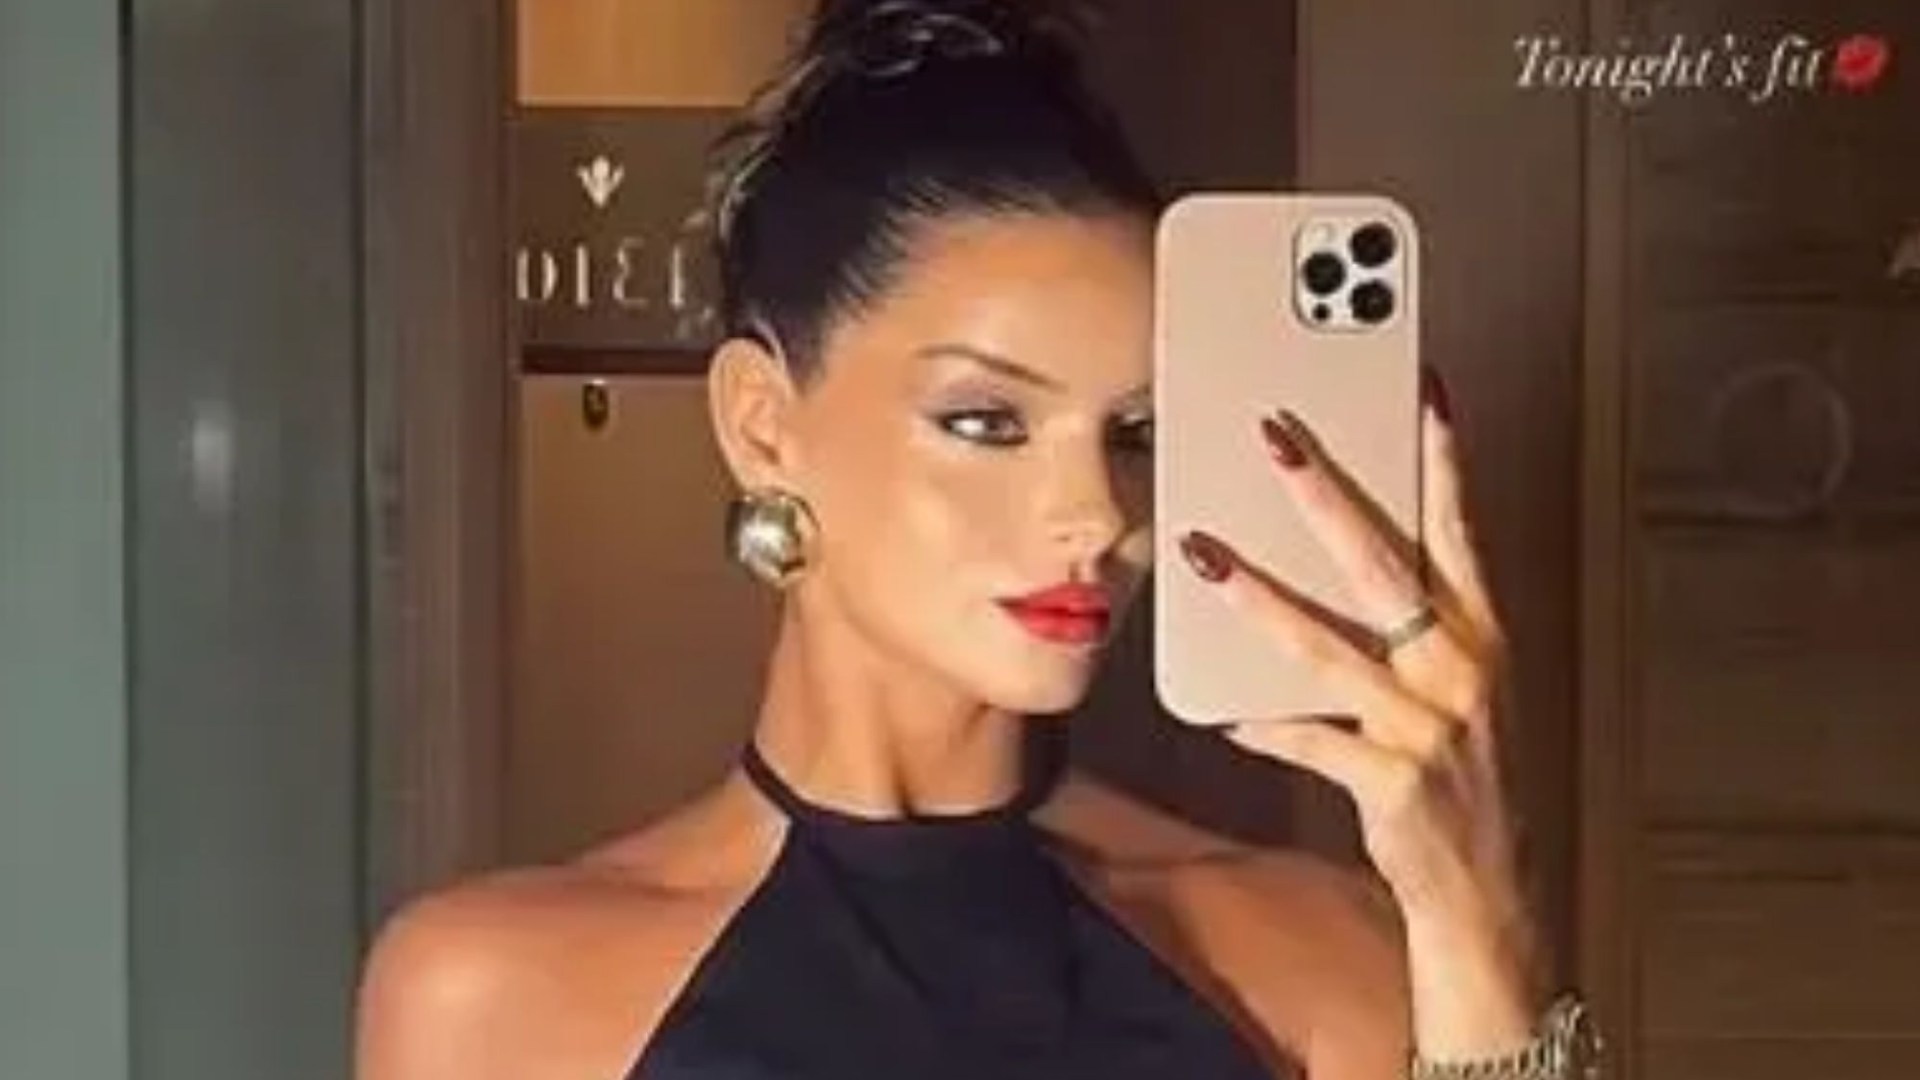 Newly single Maura Higgins shows off underboob in little black dress as she jets off to Dubai [Video]